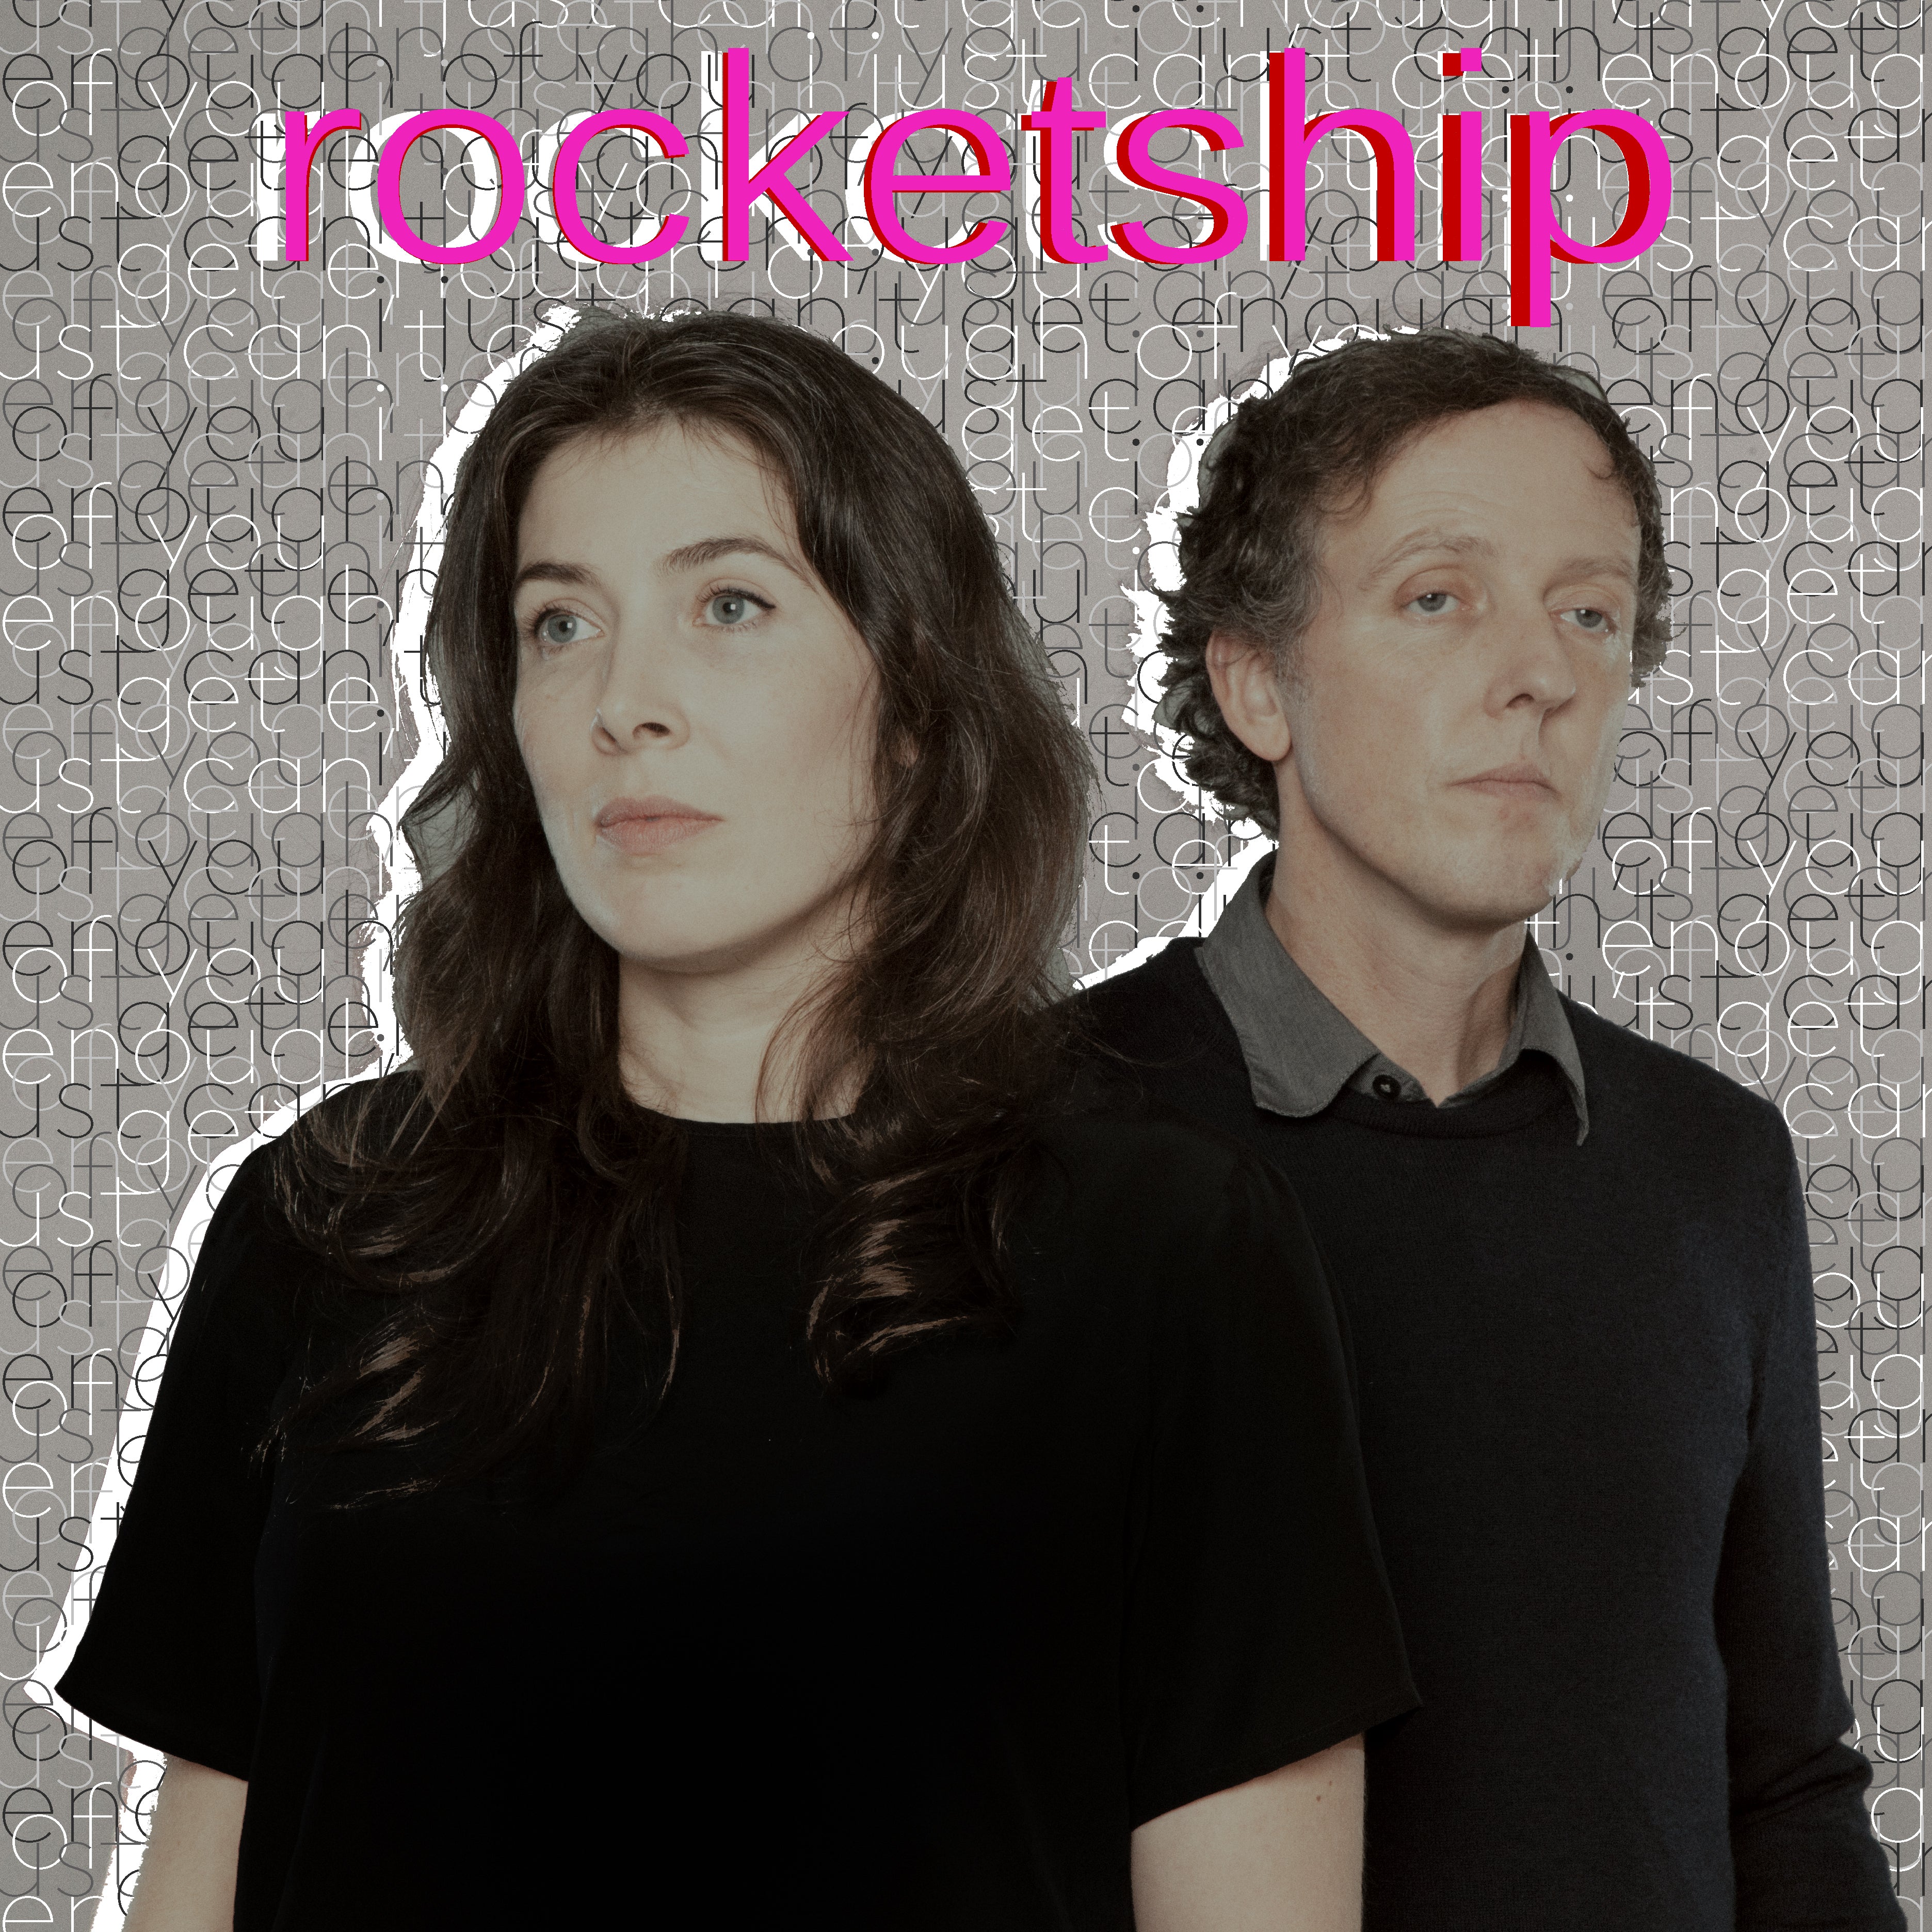 Rocketship - I Just Can't Get Enough of You